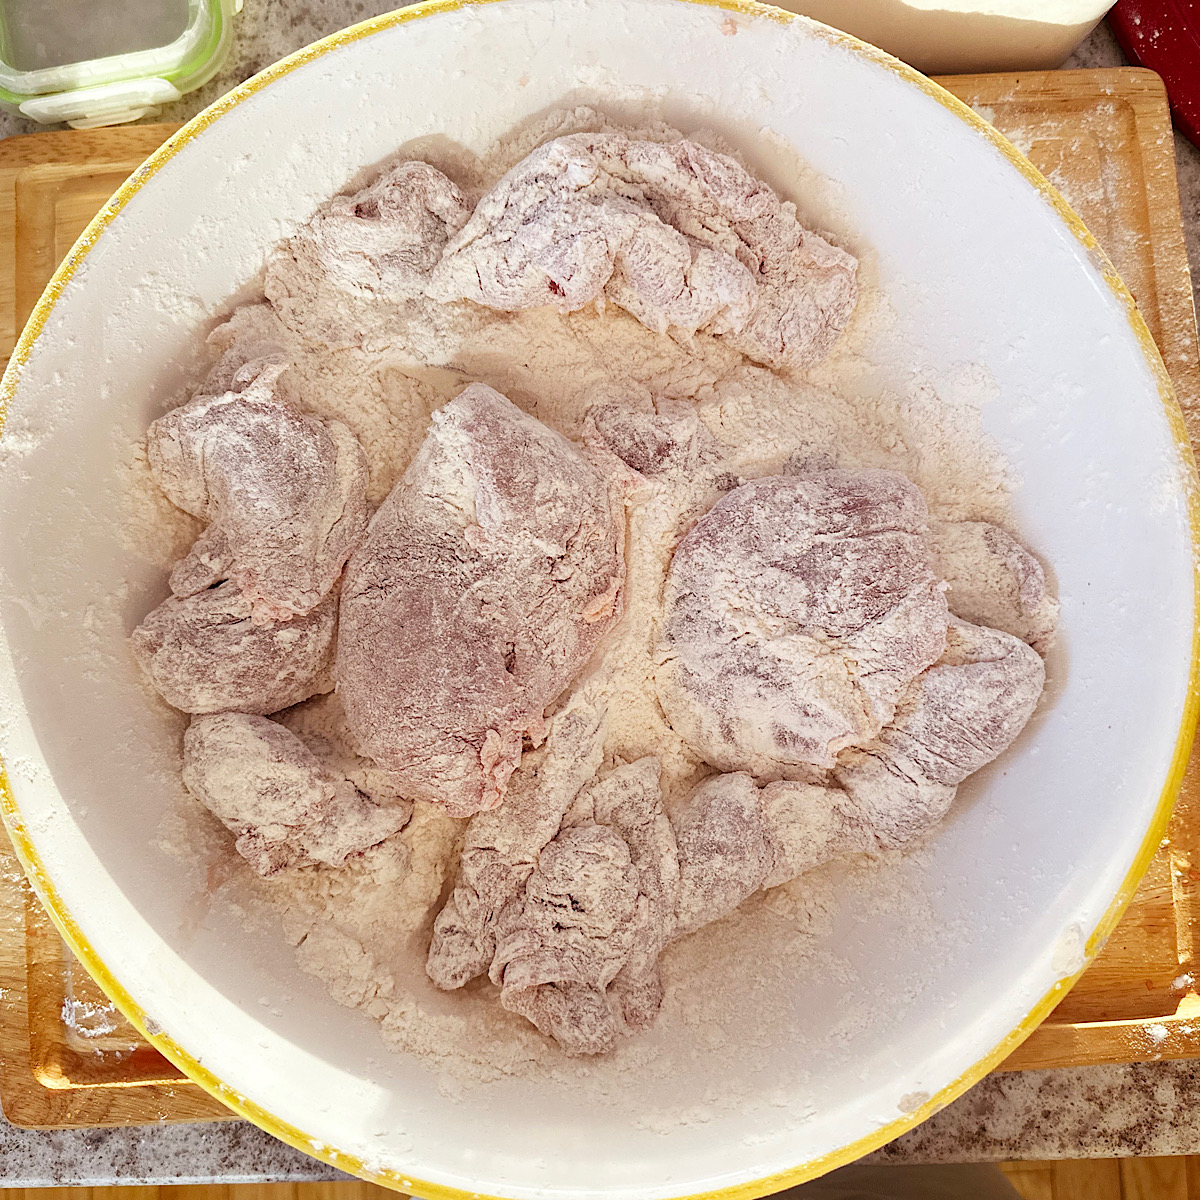 Pheasant pieces in large bowl dusted with flour.